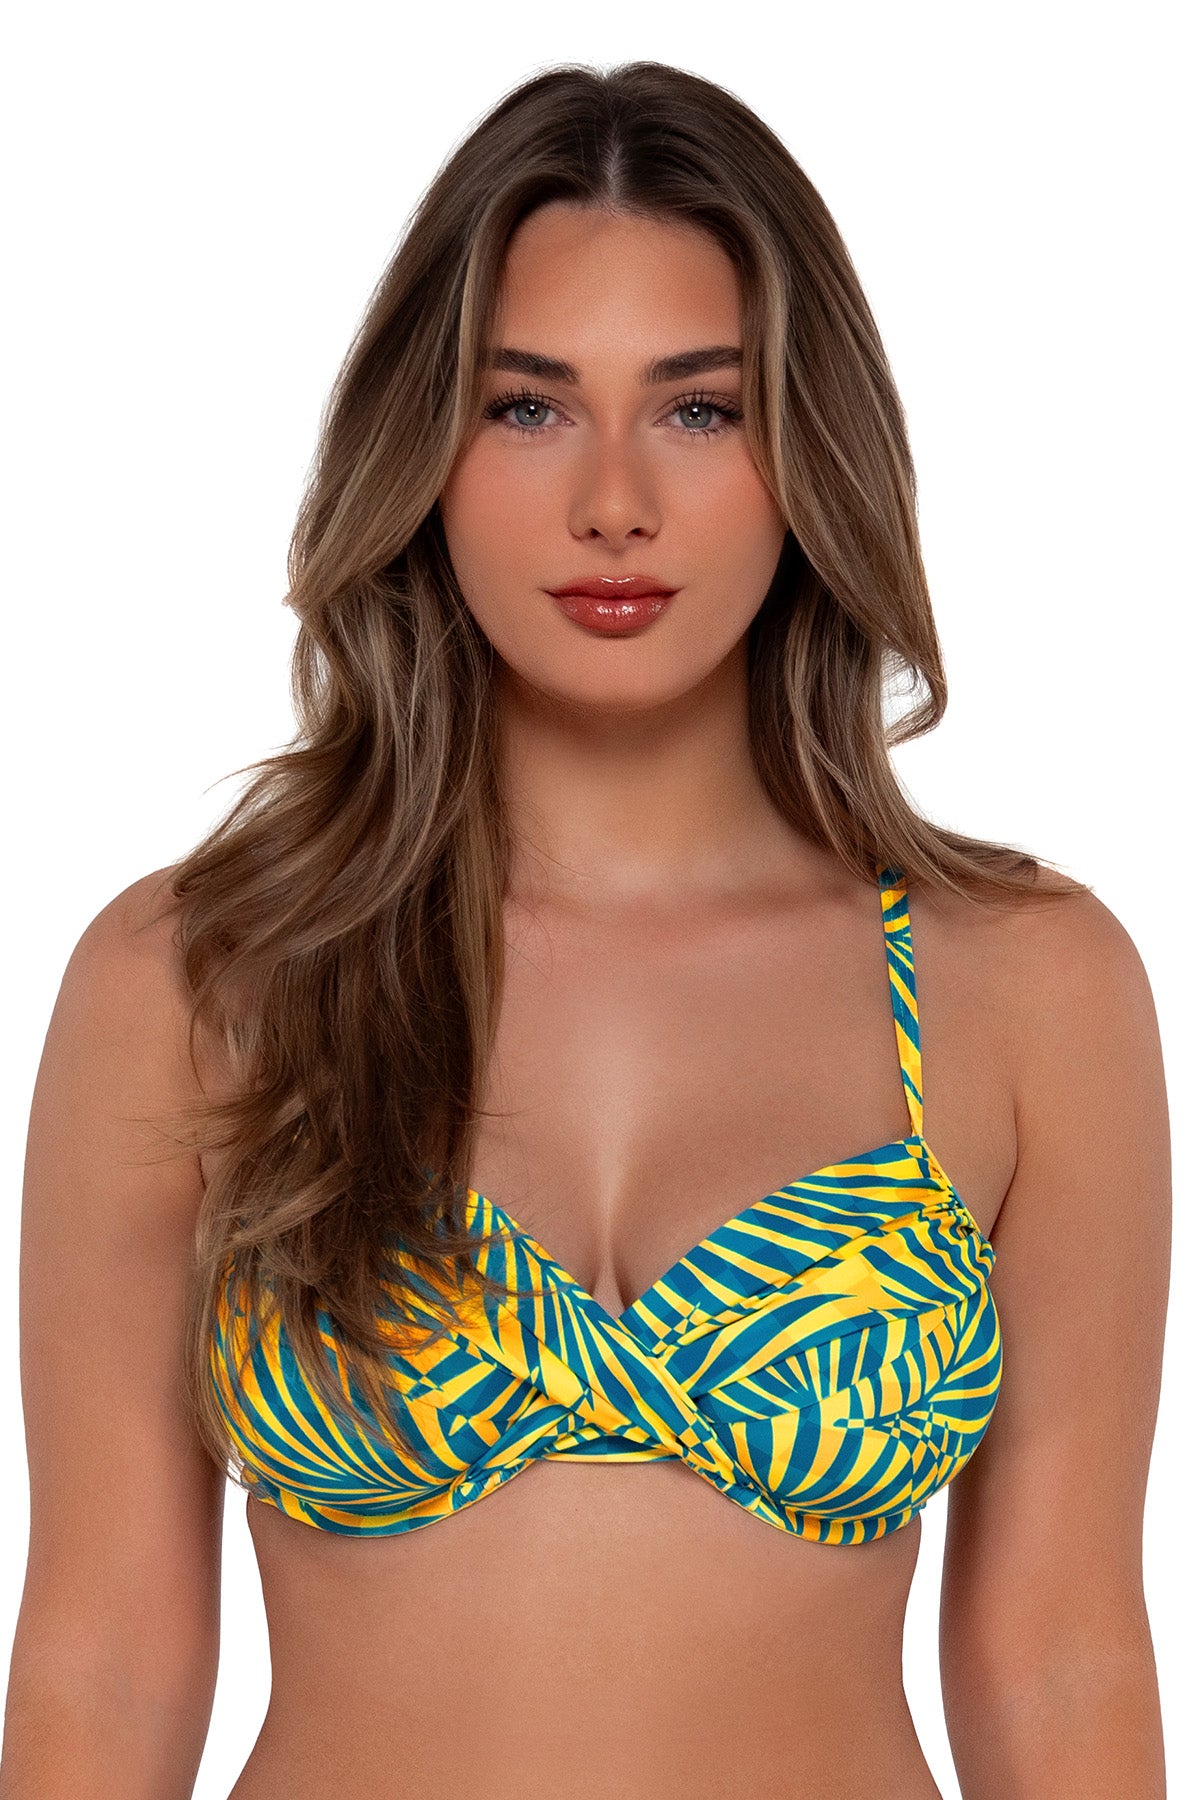 Front pose #1 of Taylor wearing Sunsets Cabana Crossroads Underwire Top